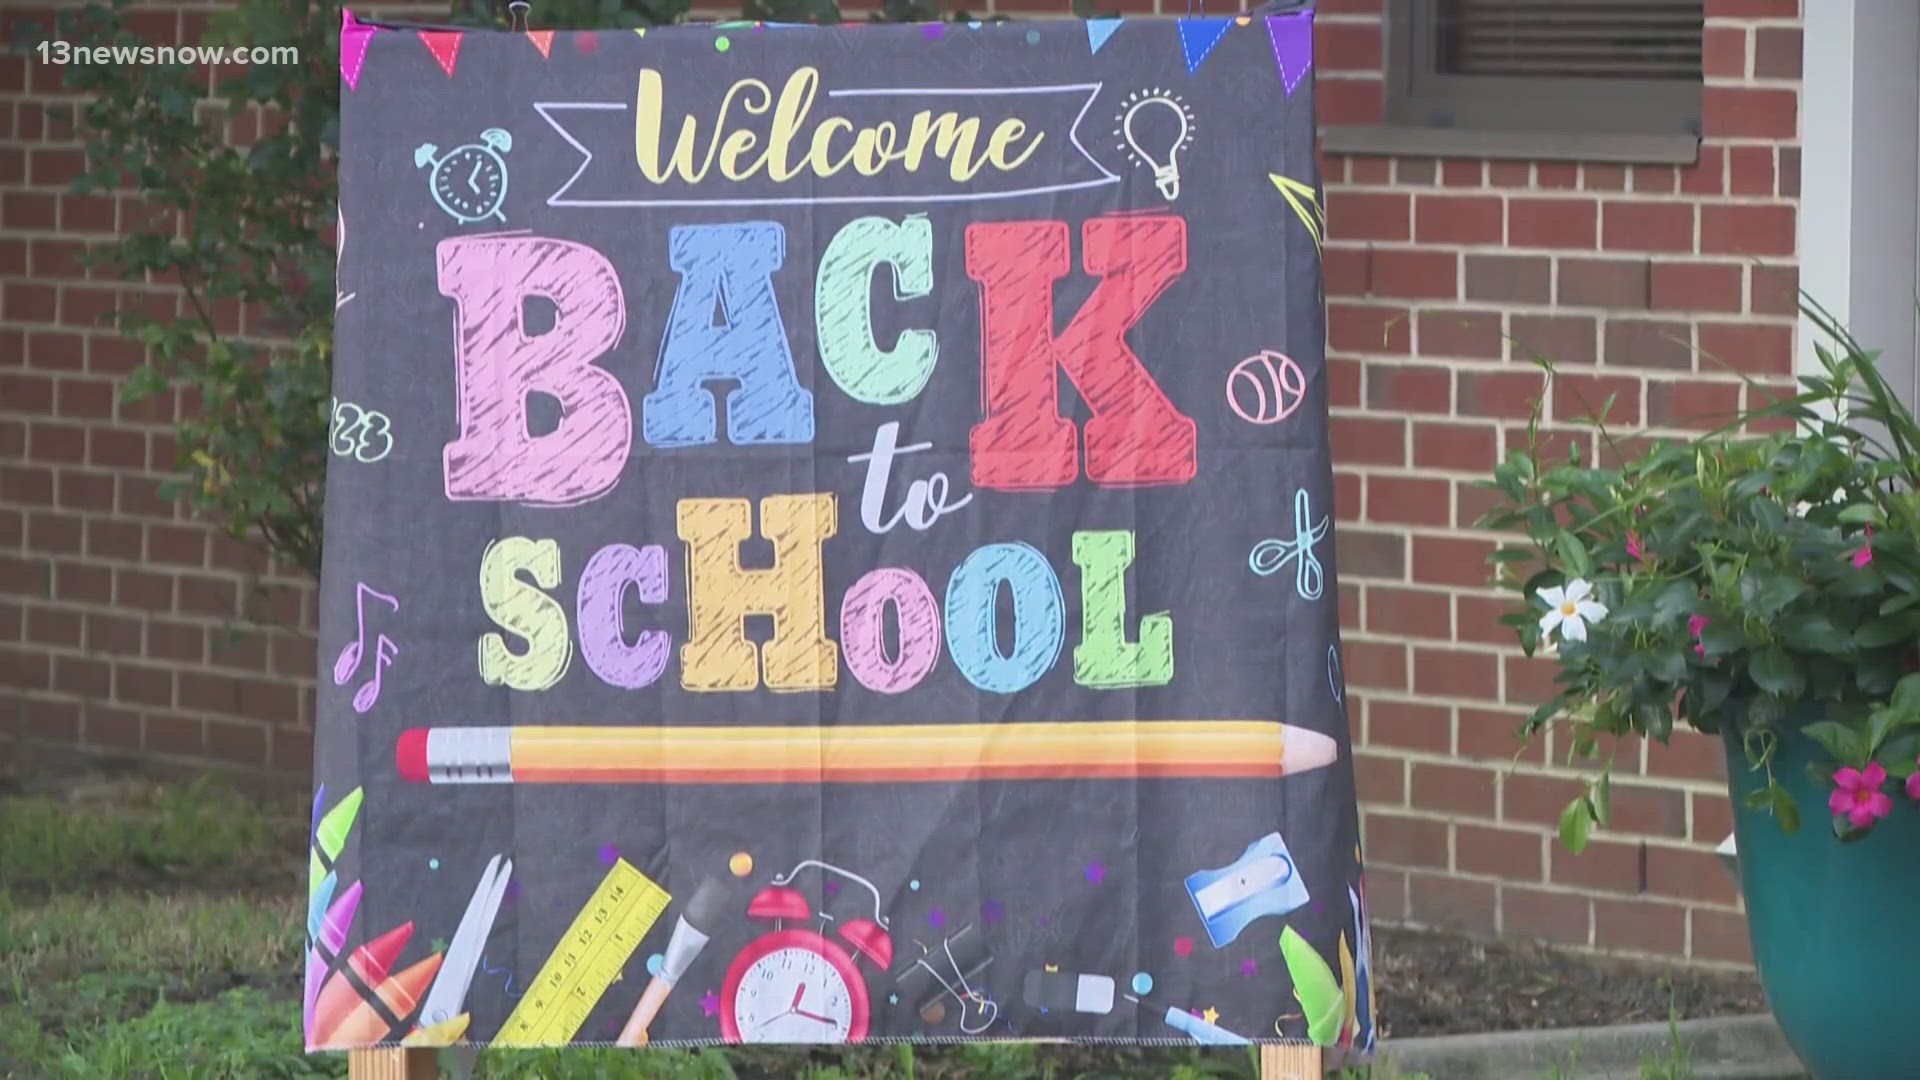 School staff, signs and new safety measures greeted students as they came back to school.